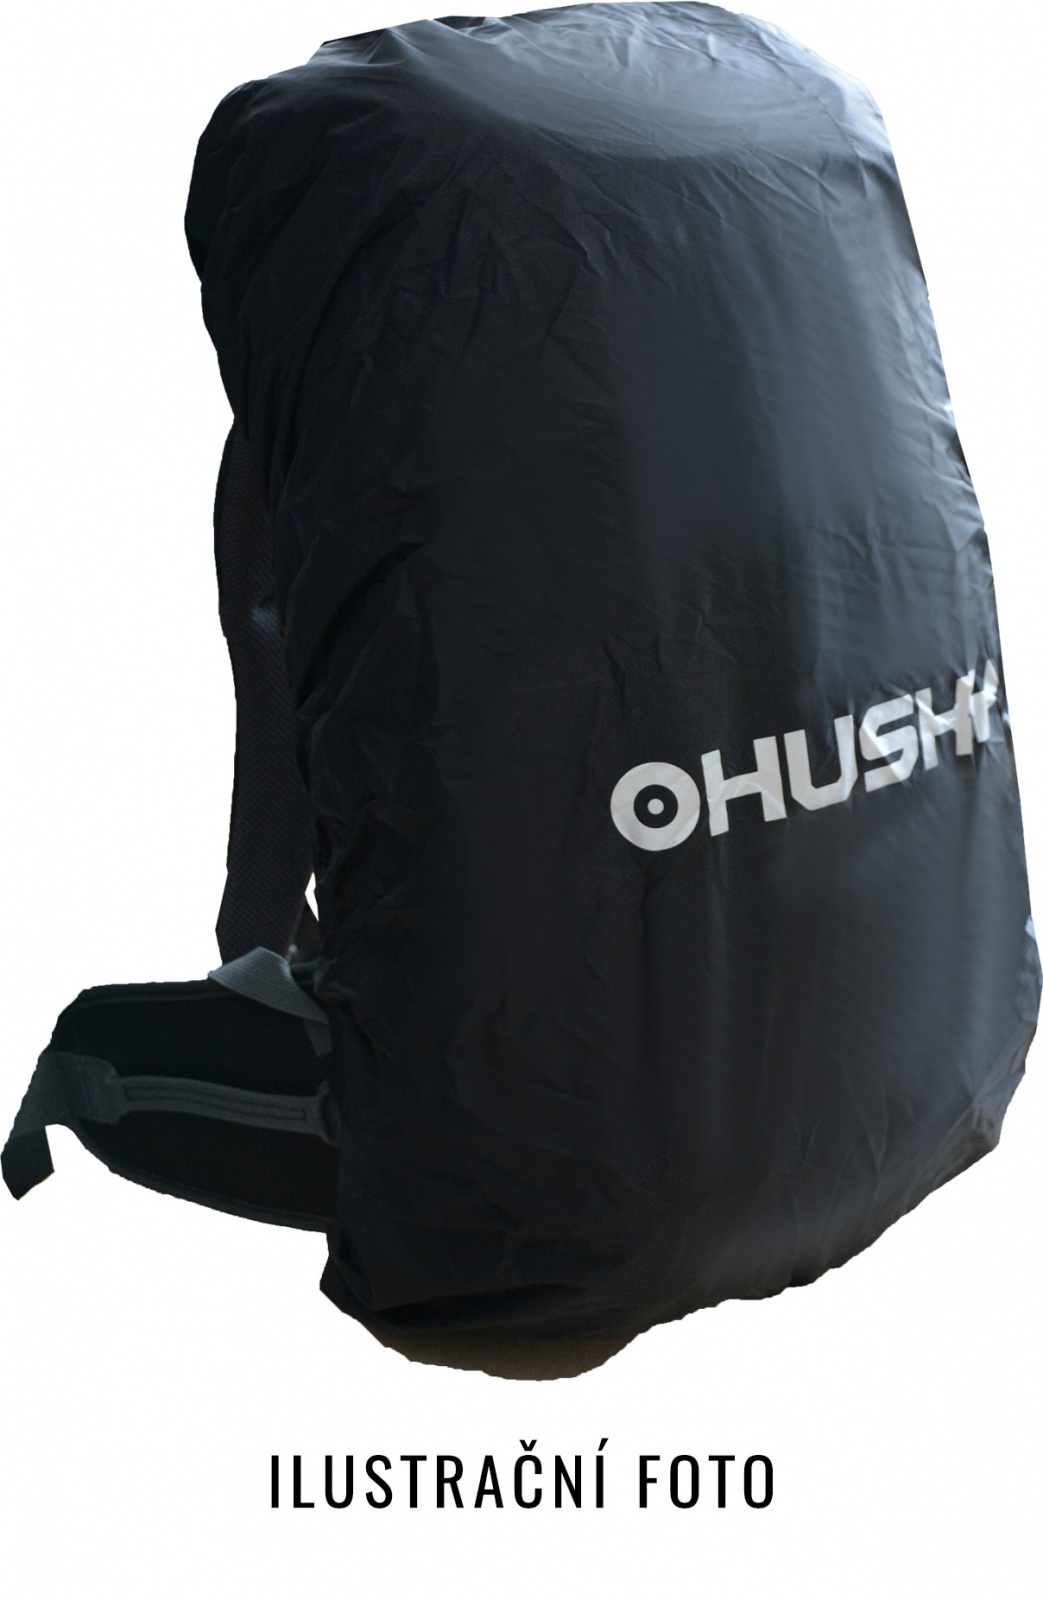 Spare Part HUSKY Raincover, Backpack Rain Cover, Size M Black